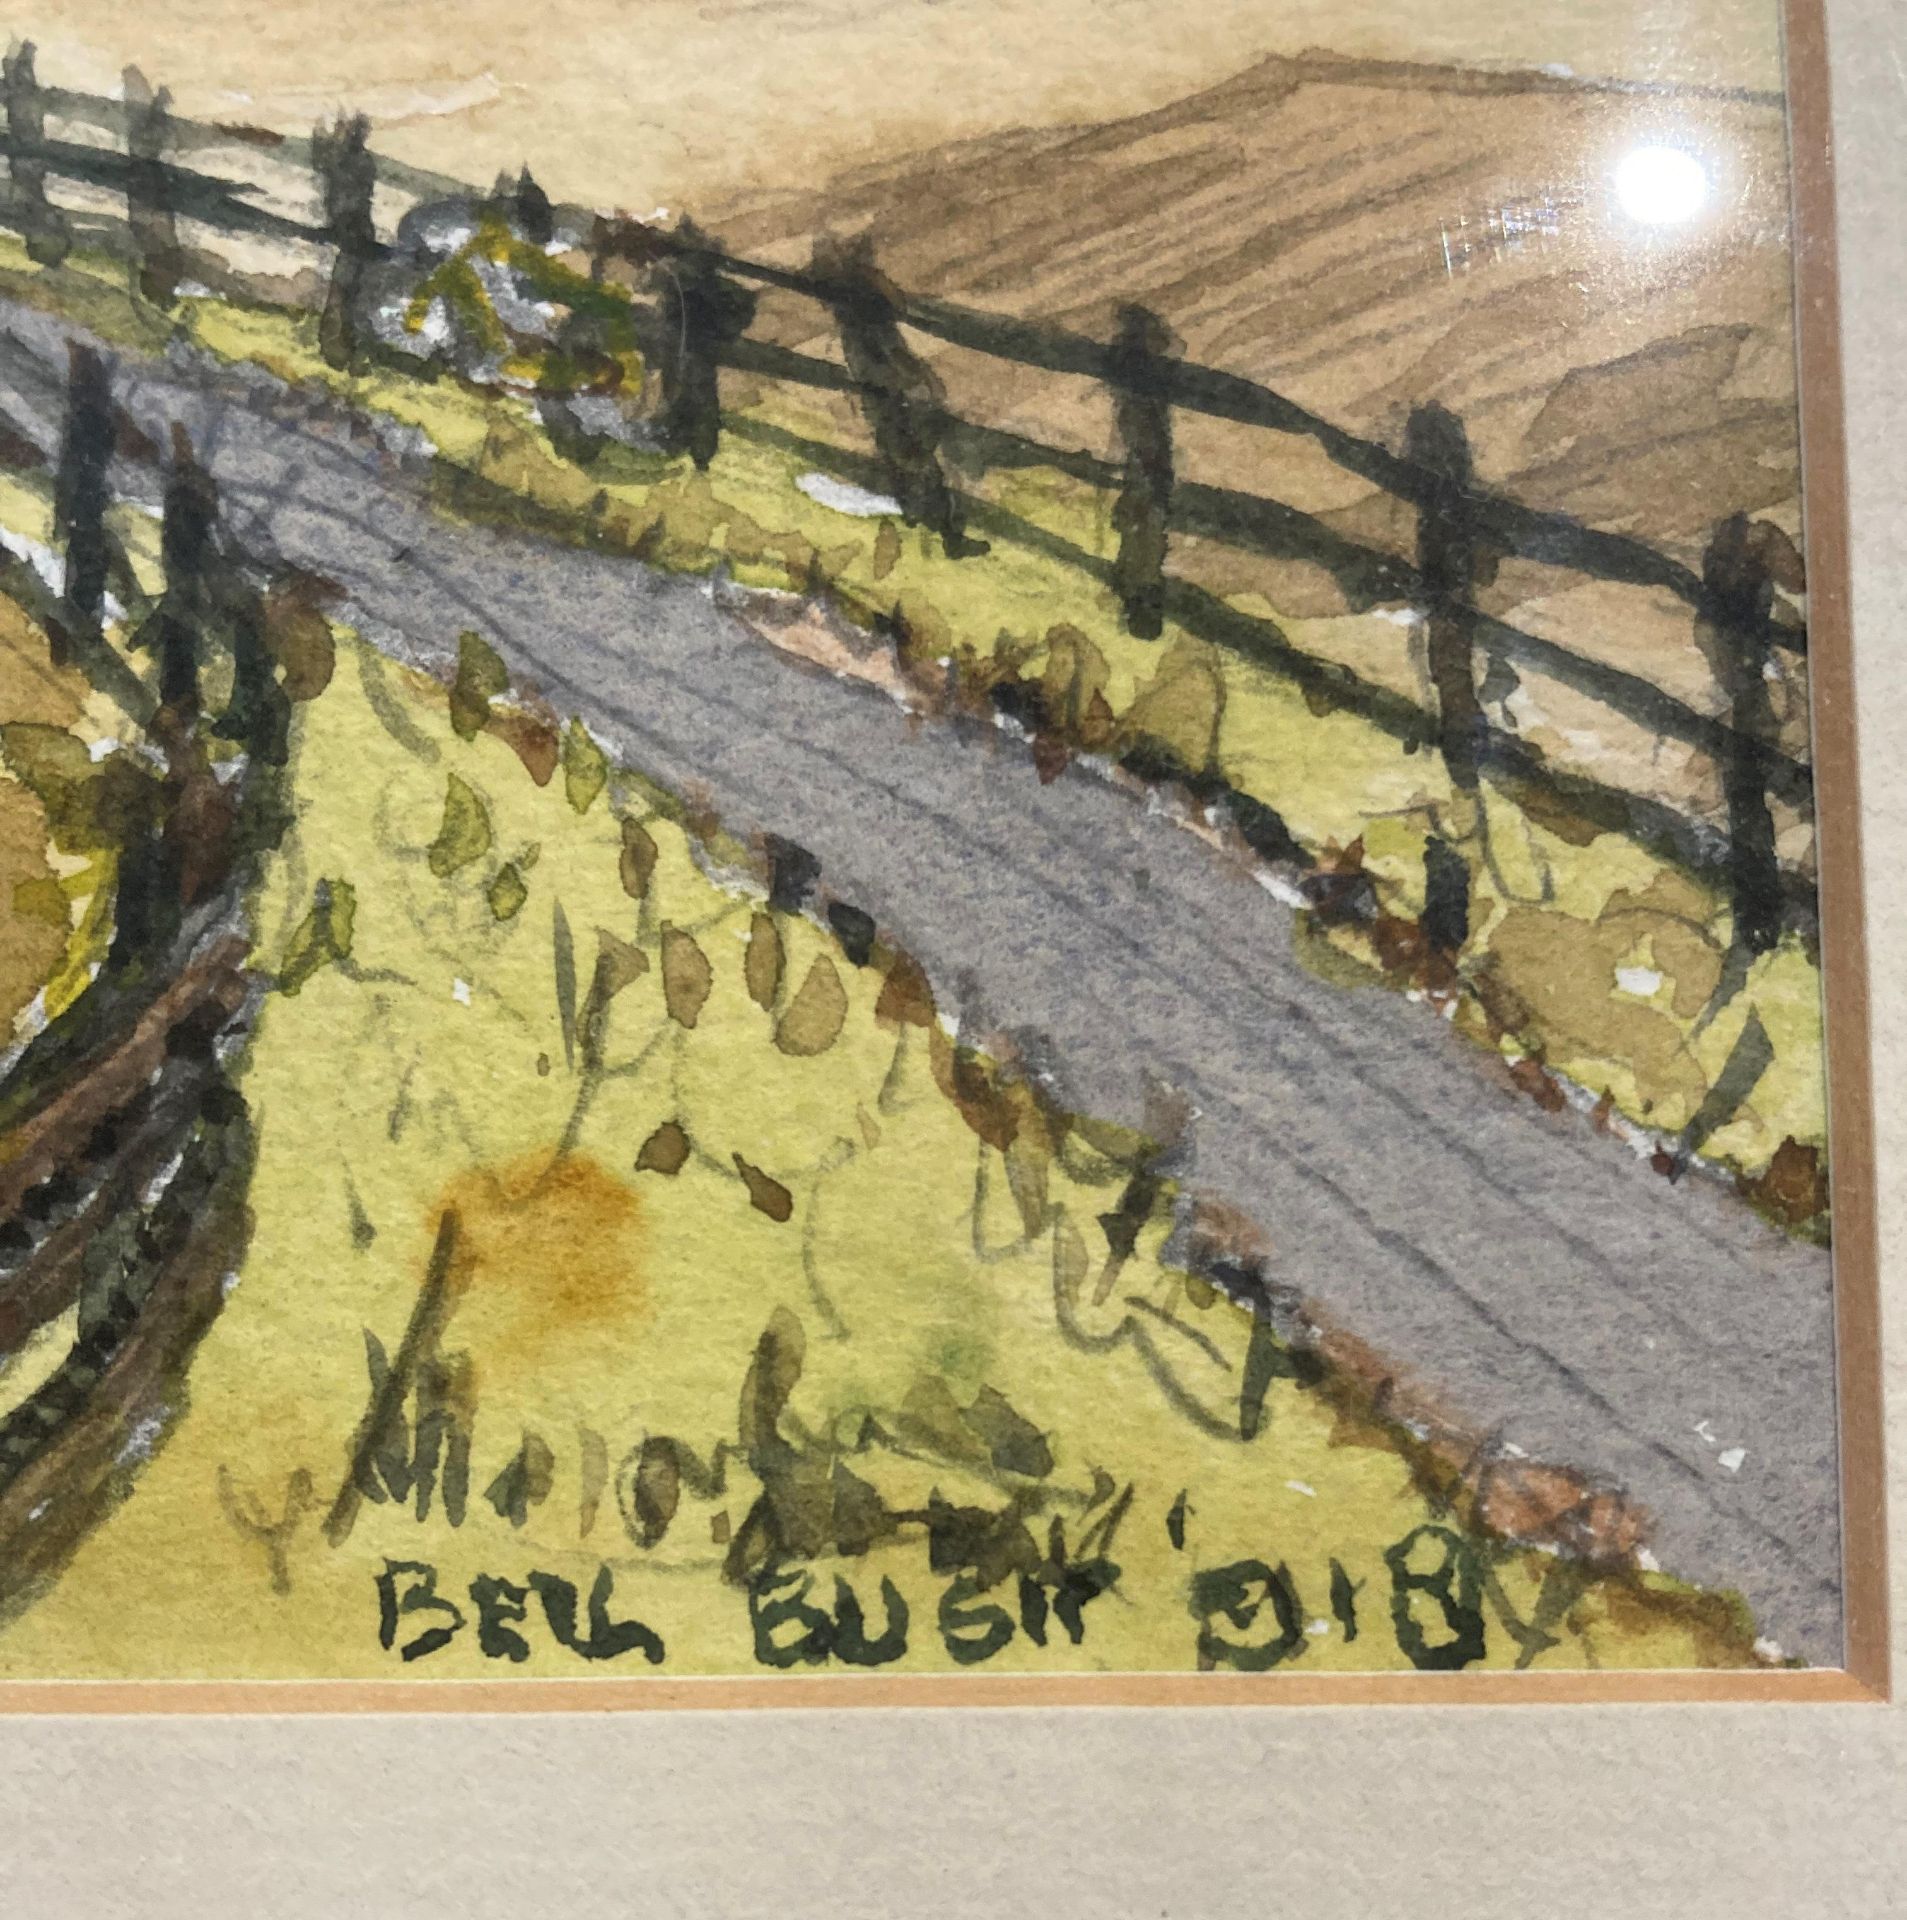 Bell Busk 018? small framed watercolour of track in undulating farmland leading to village in the - Image 2 of 3